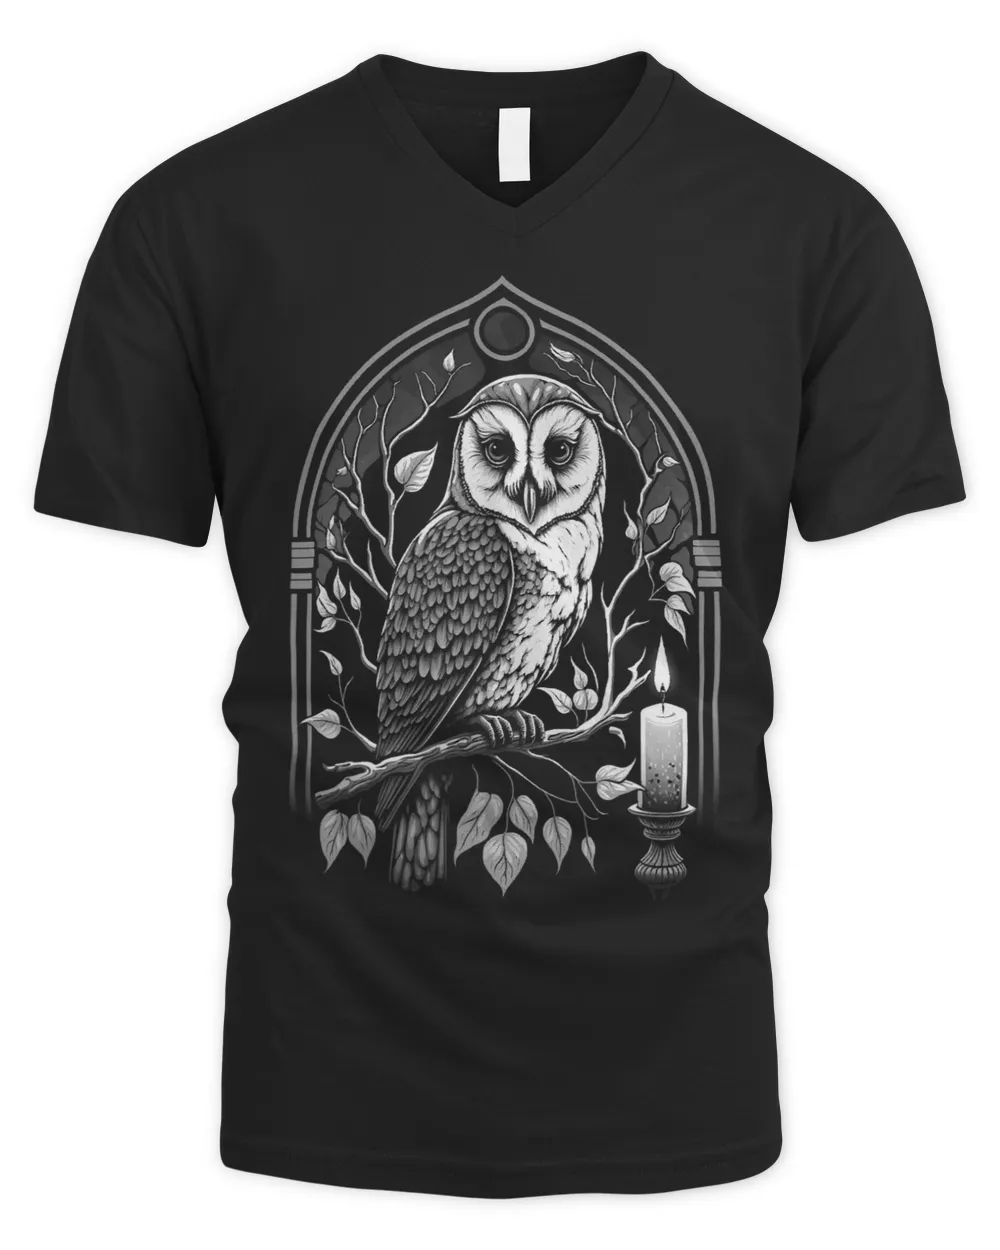 Wiccan Witch Owl With Candle Illustration Version 4 of 6